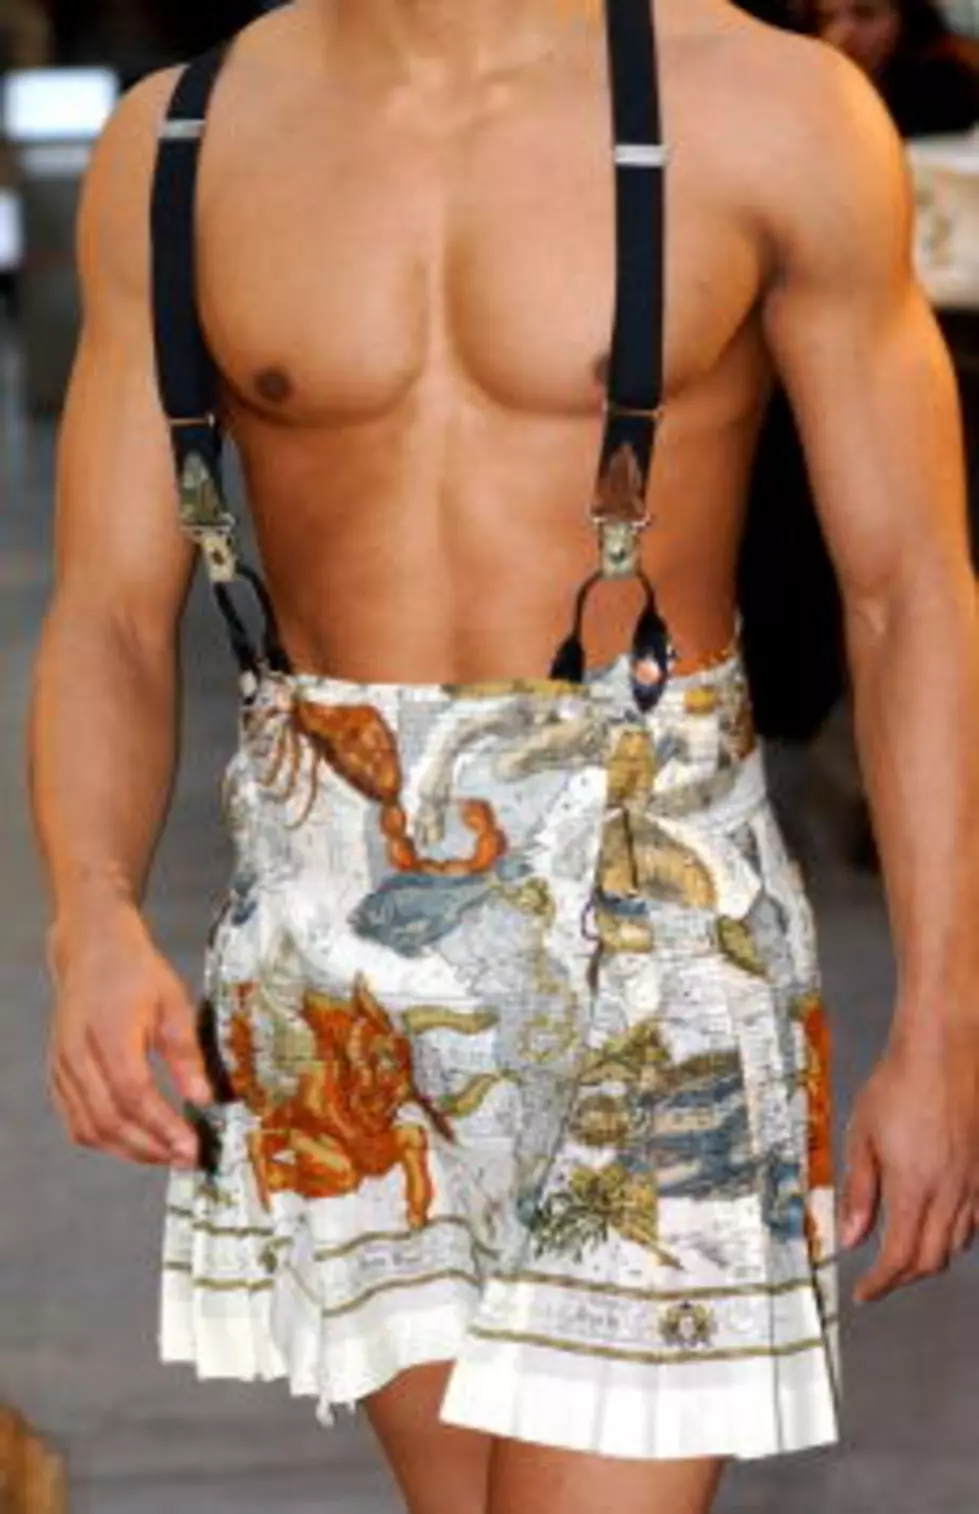 It May Be a New Trend for Men, but Will We Actually See More Men Wearing Man-Skirts?